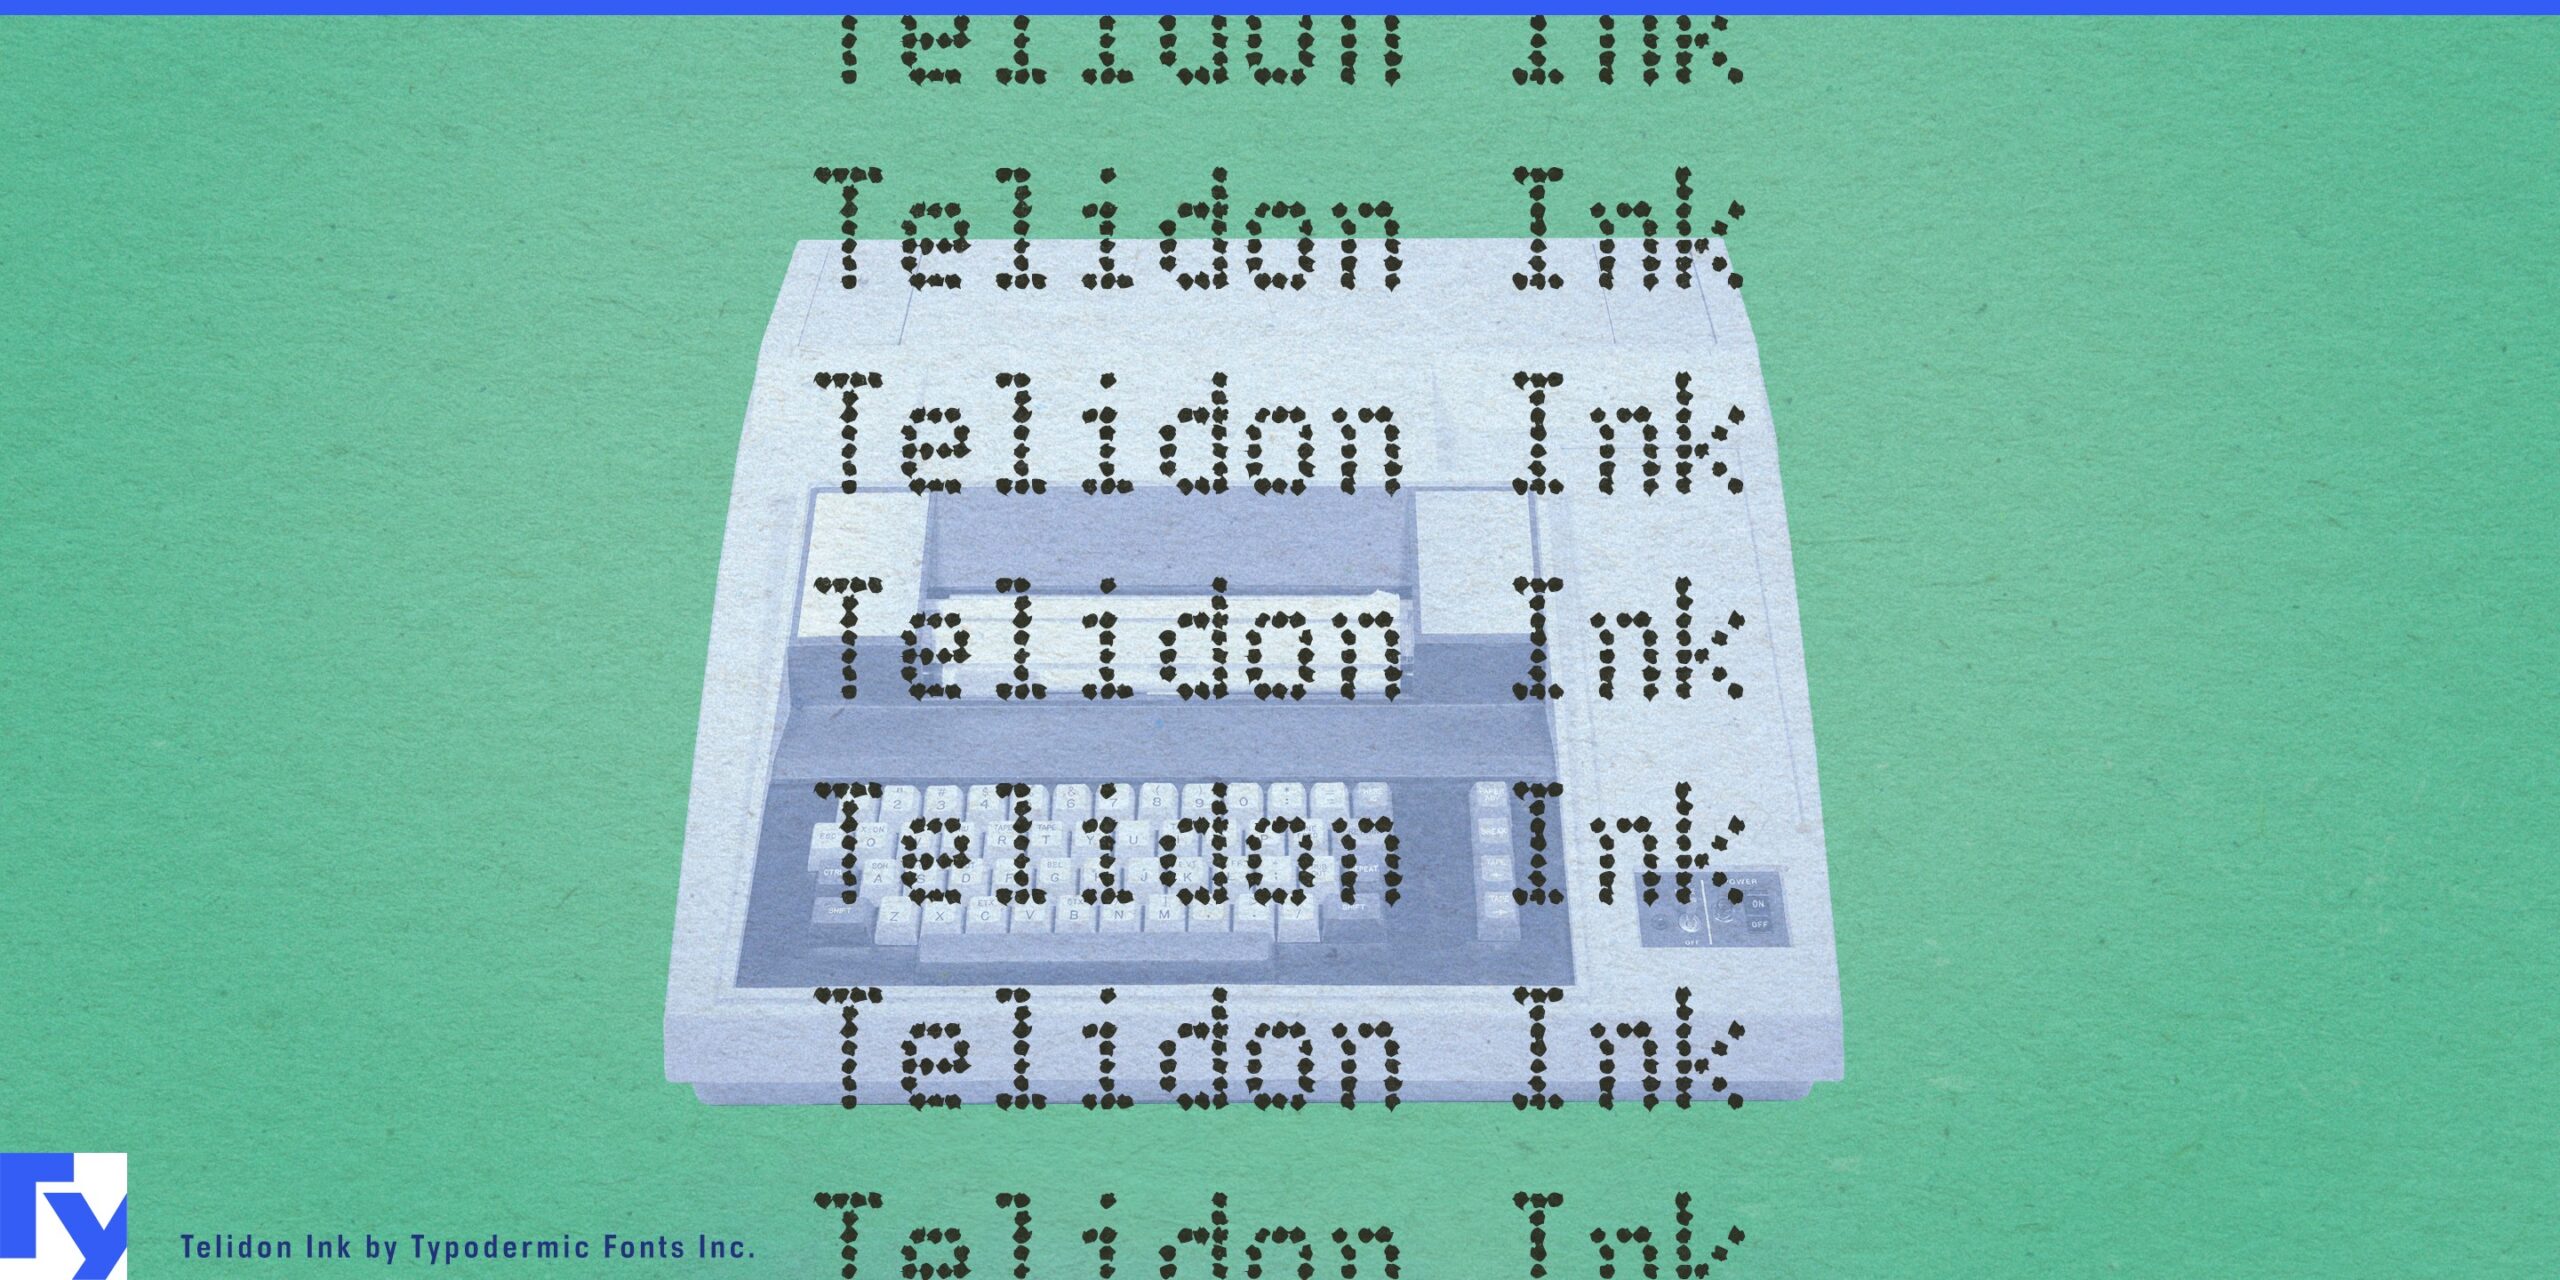 Let Telidon Ink transport you to the golden age of computing with its nostalgic vibe.